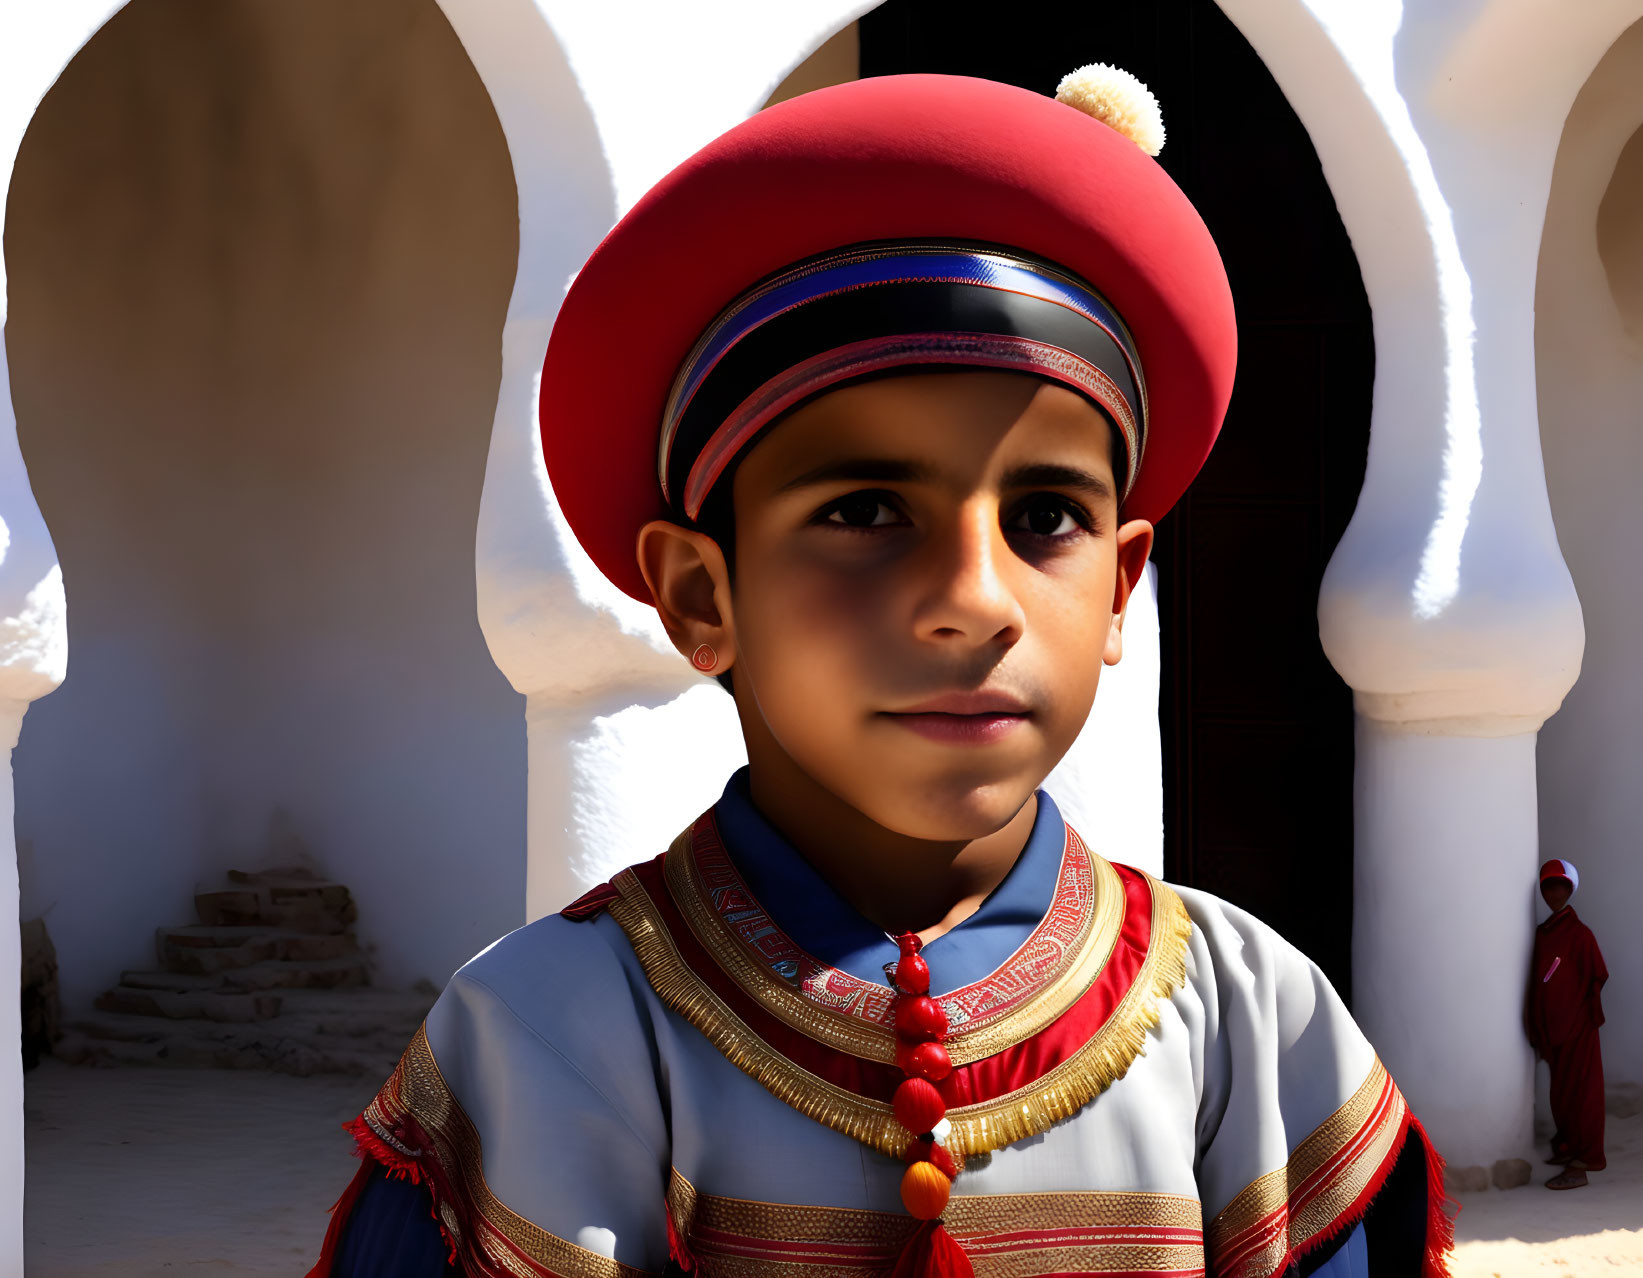 Traditional Attired Boy in Red Hat and Vest in Sunlit Courtyard